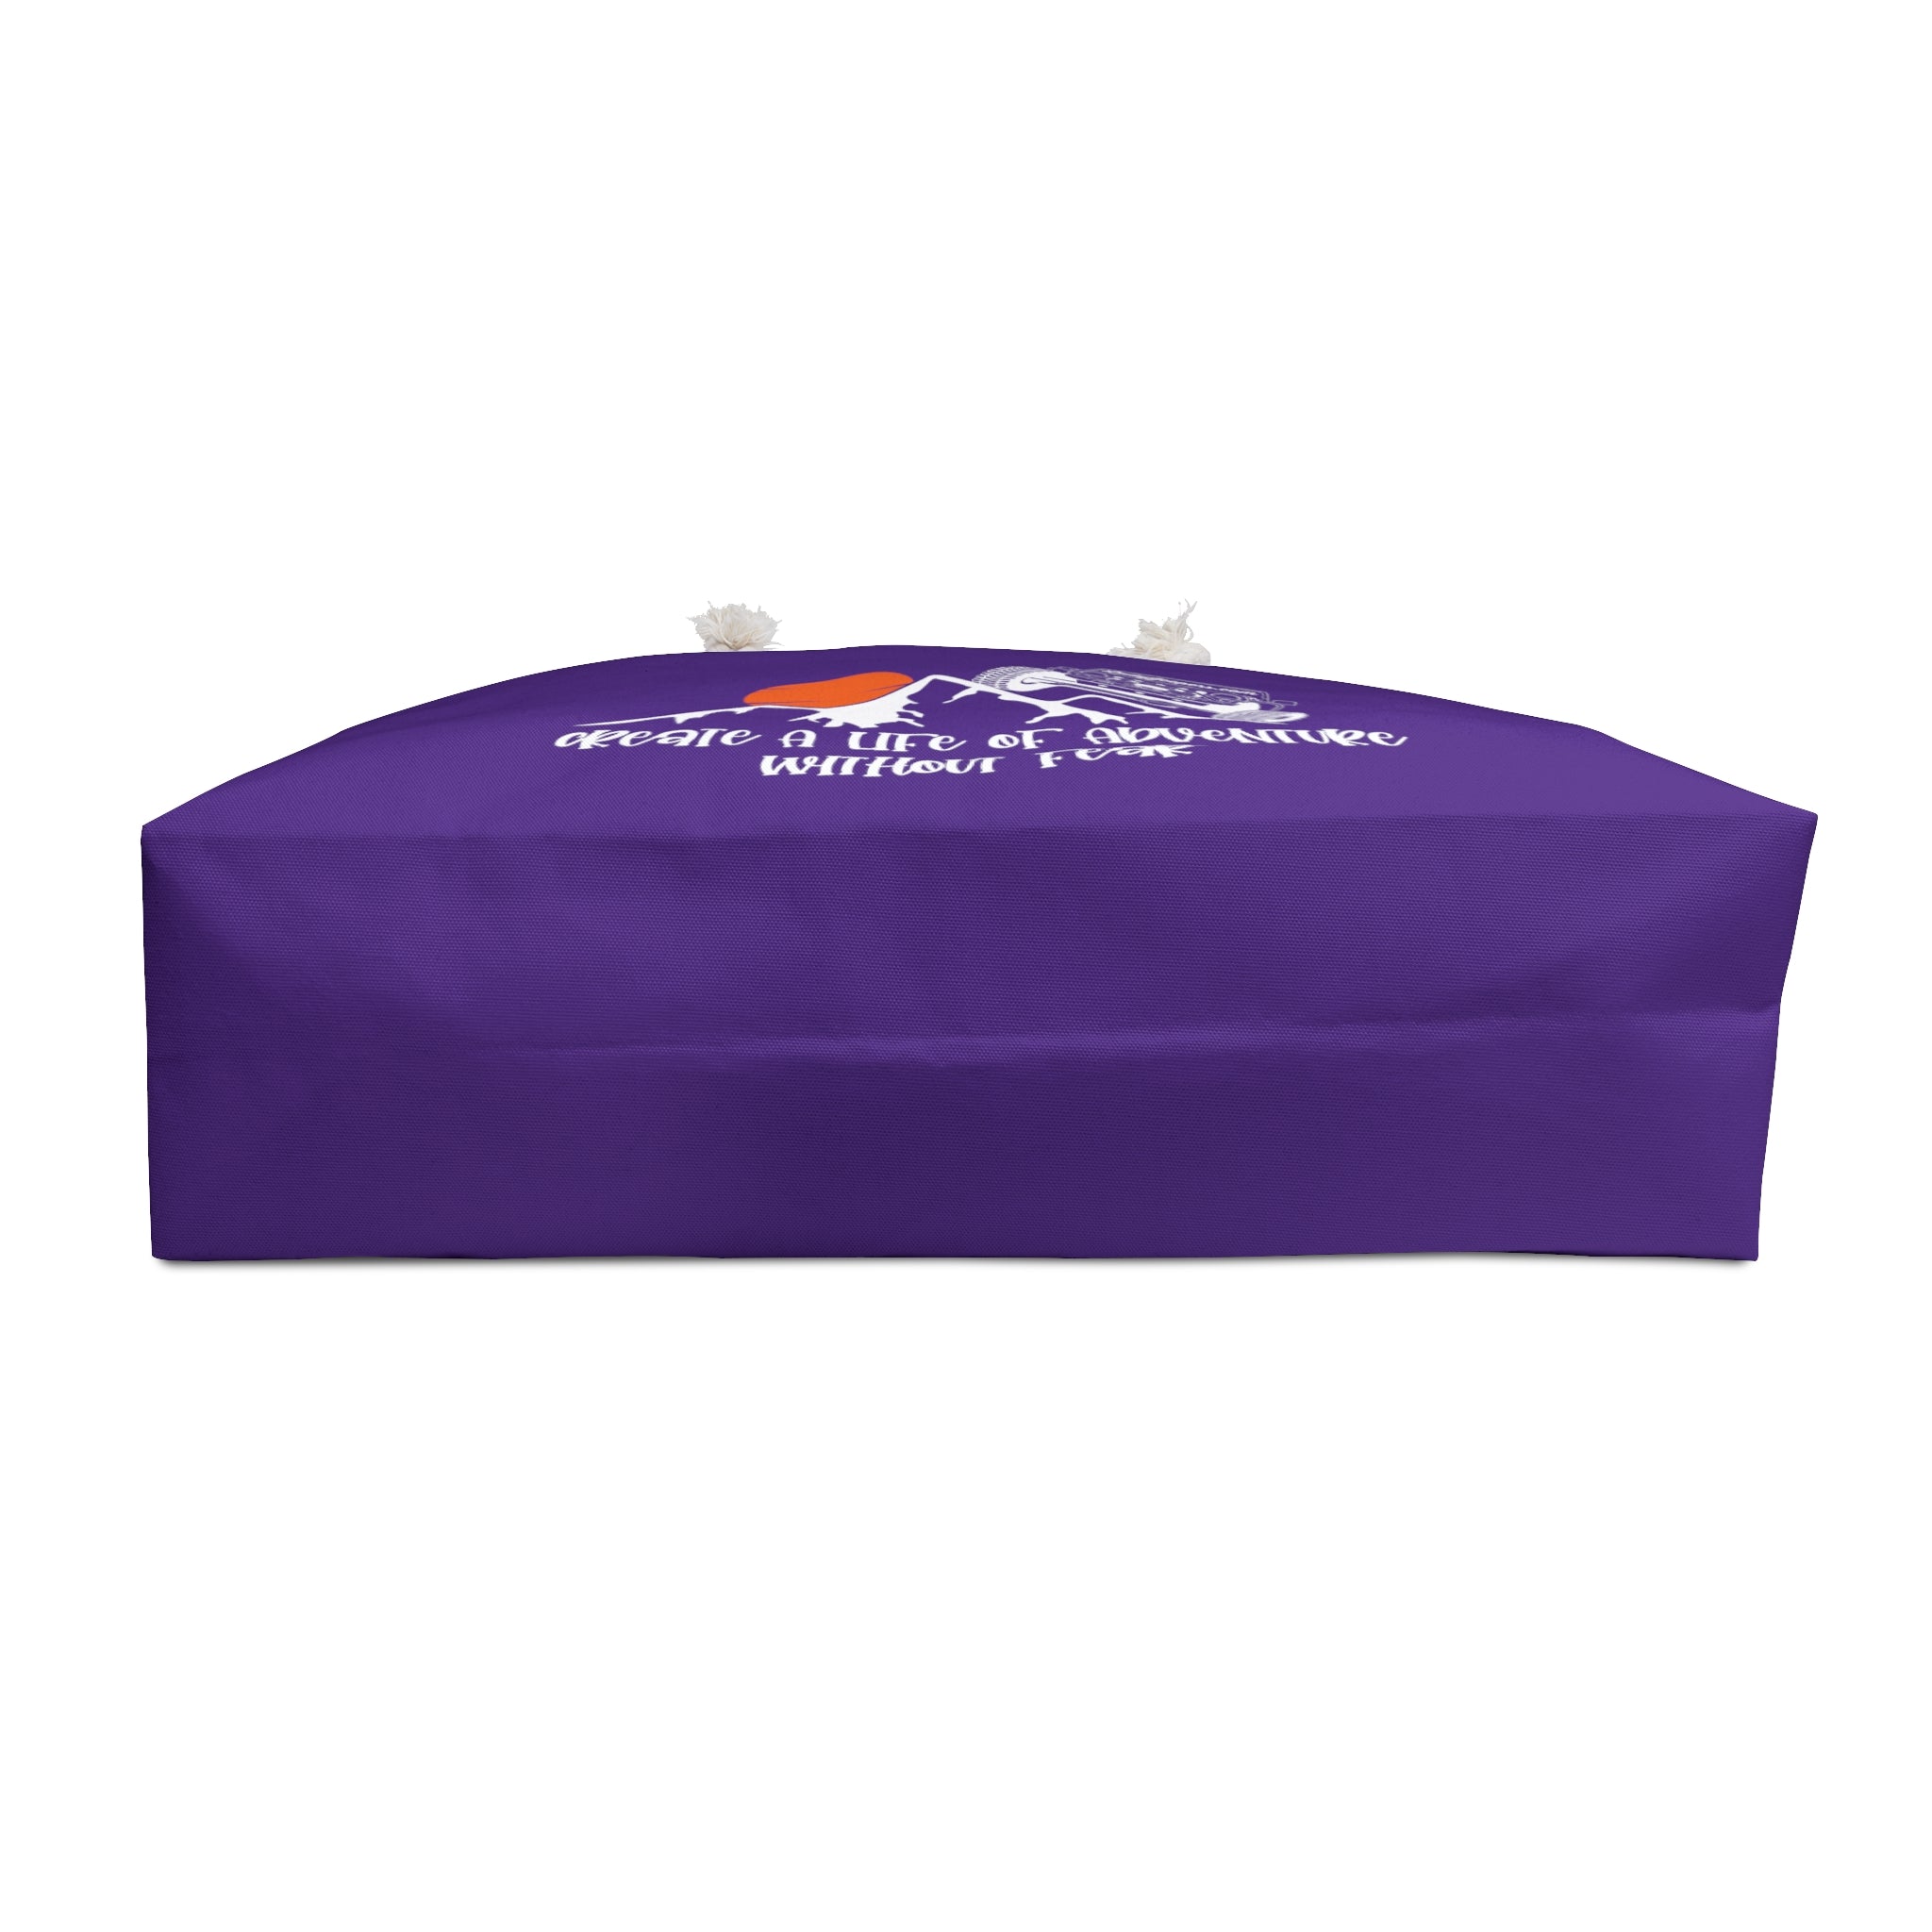 Create A Life Of Adventure Without Fear White Design on Purple Weekender Bag